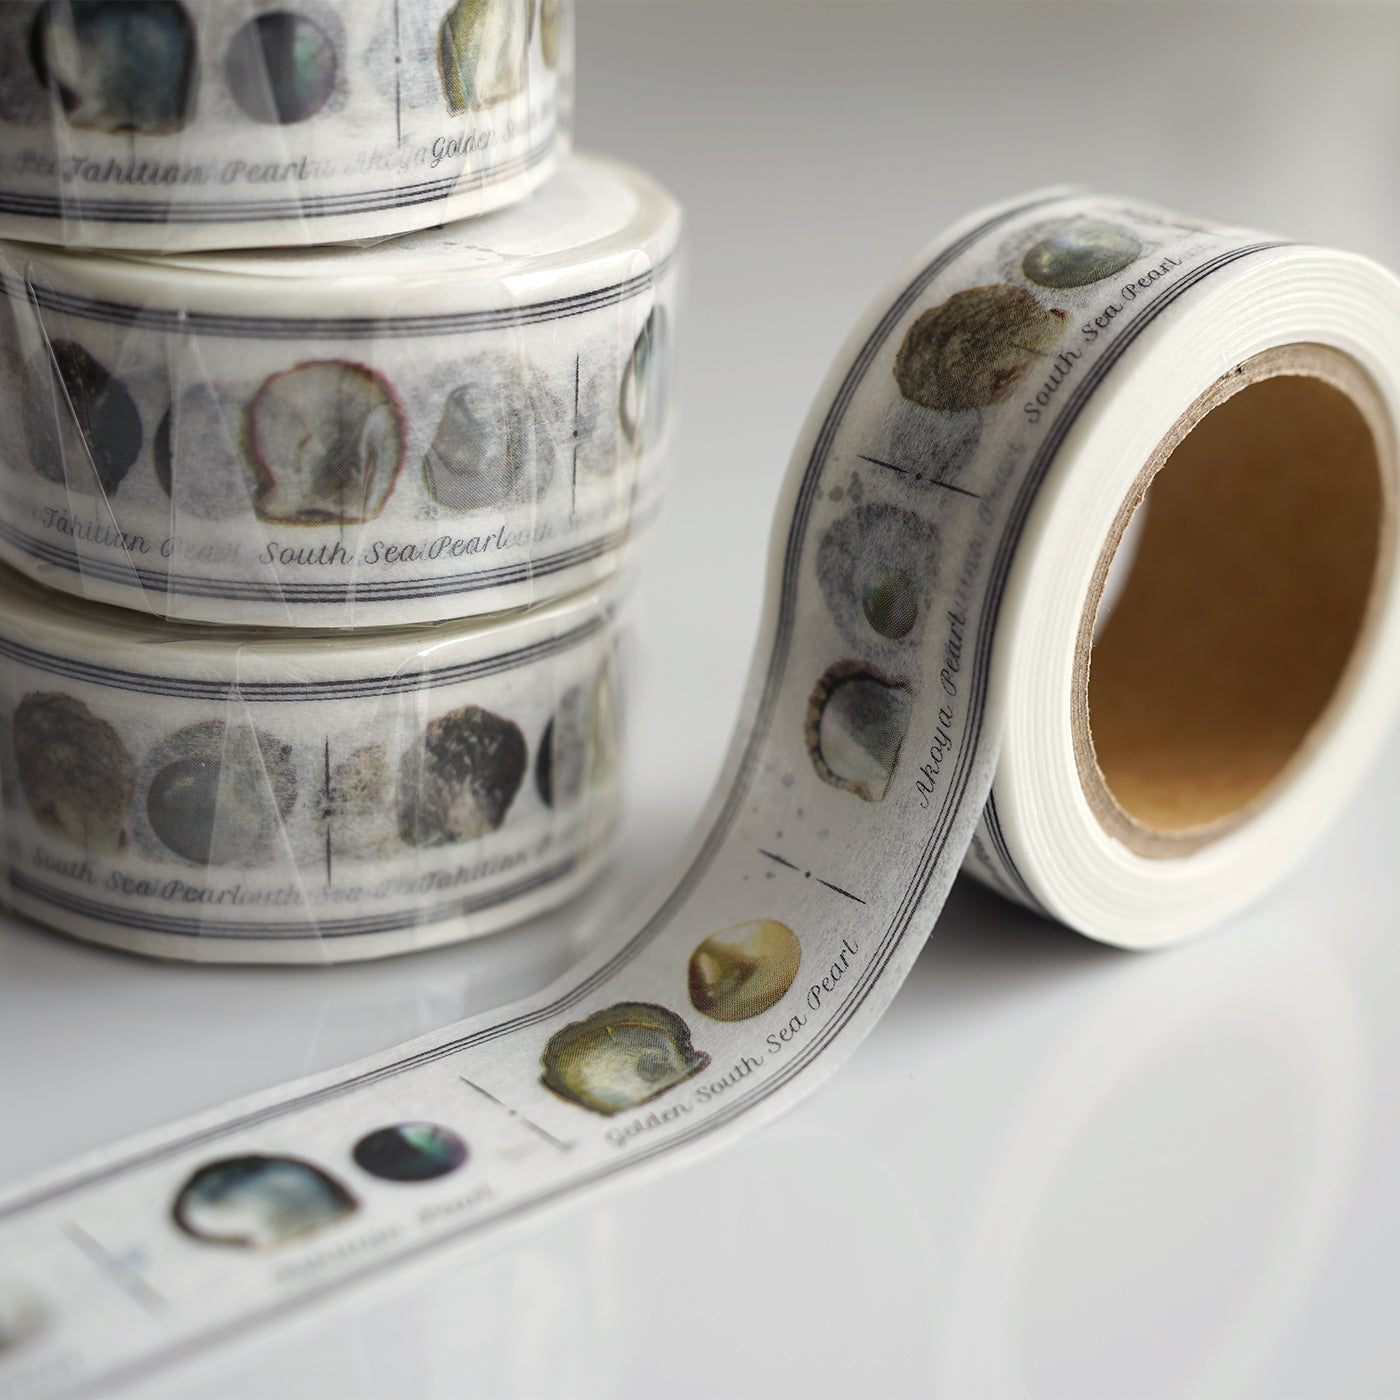 【COLLECTIBLE】Masking Tape "パールと母貝" 20mm